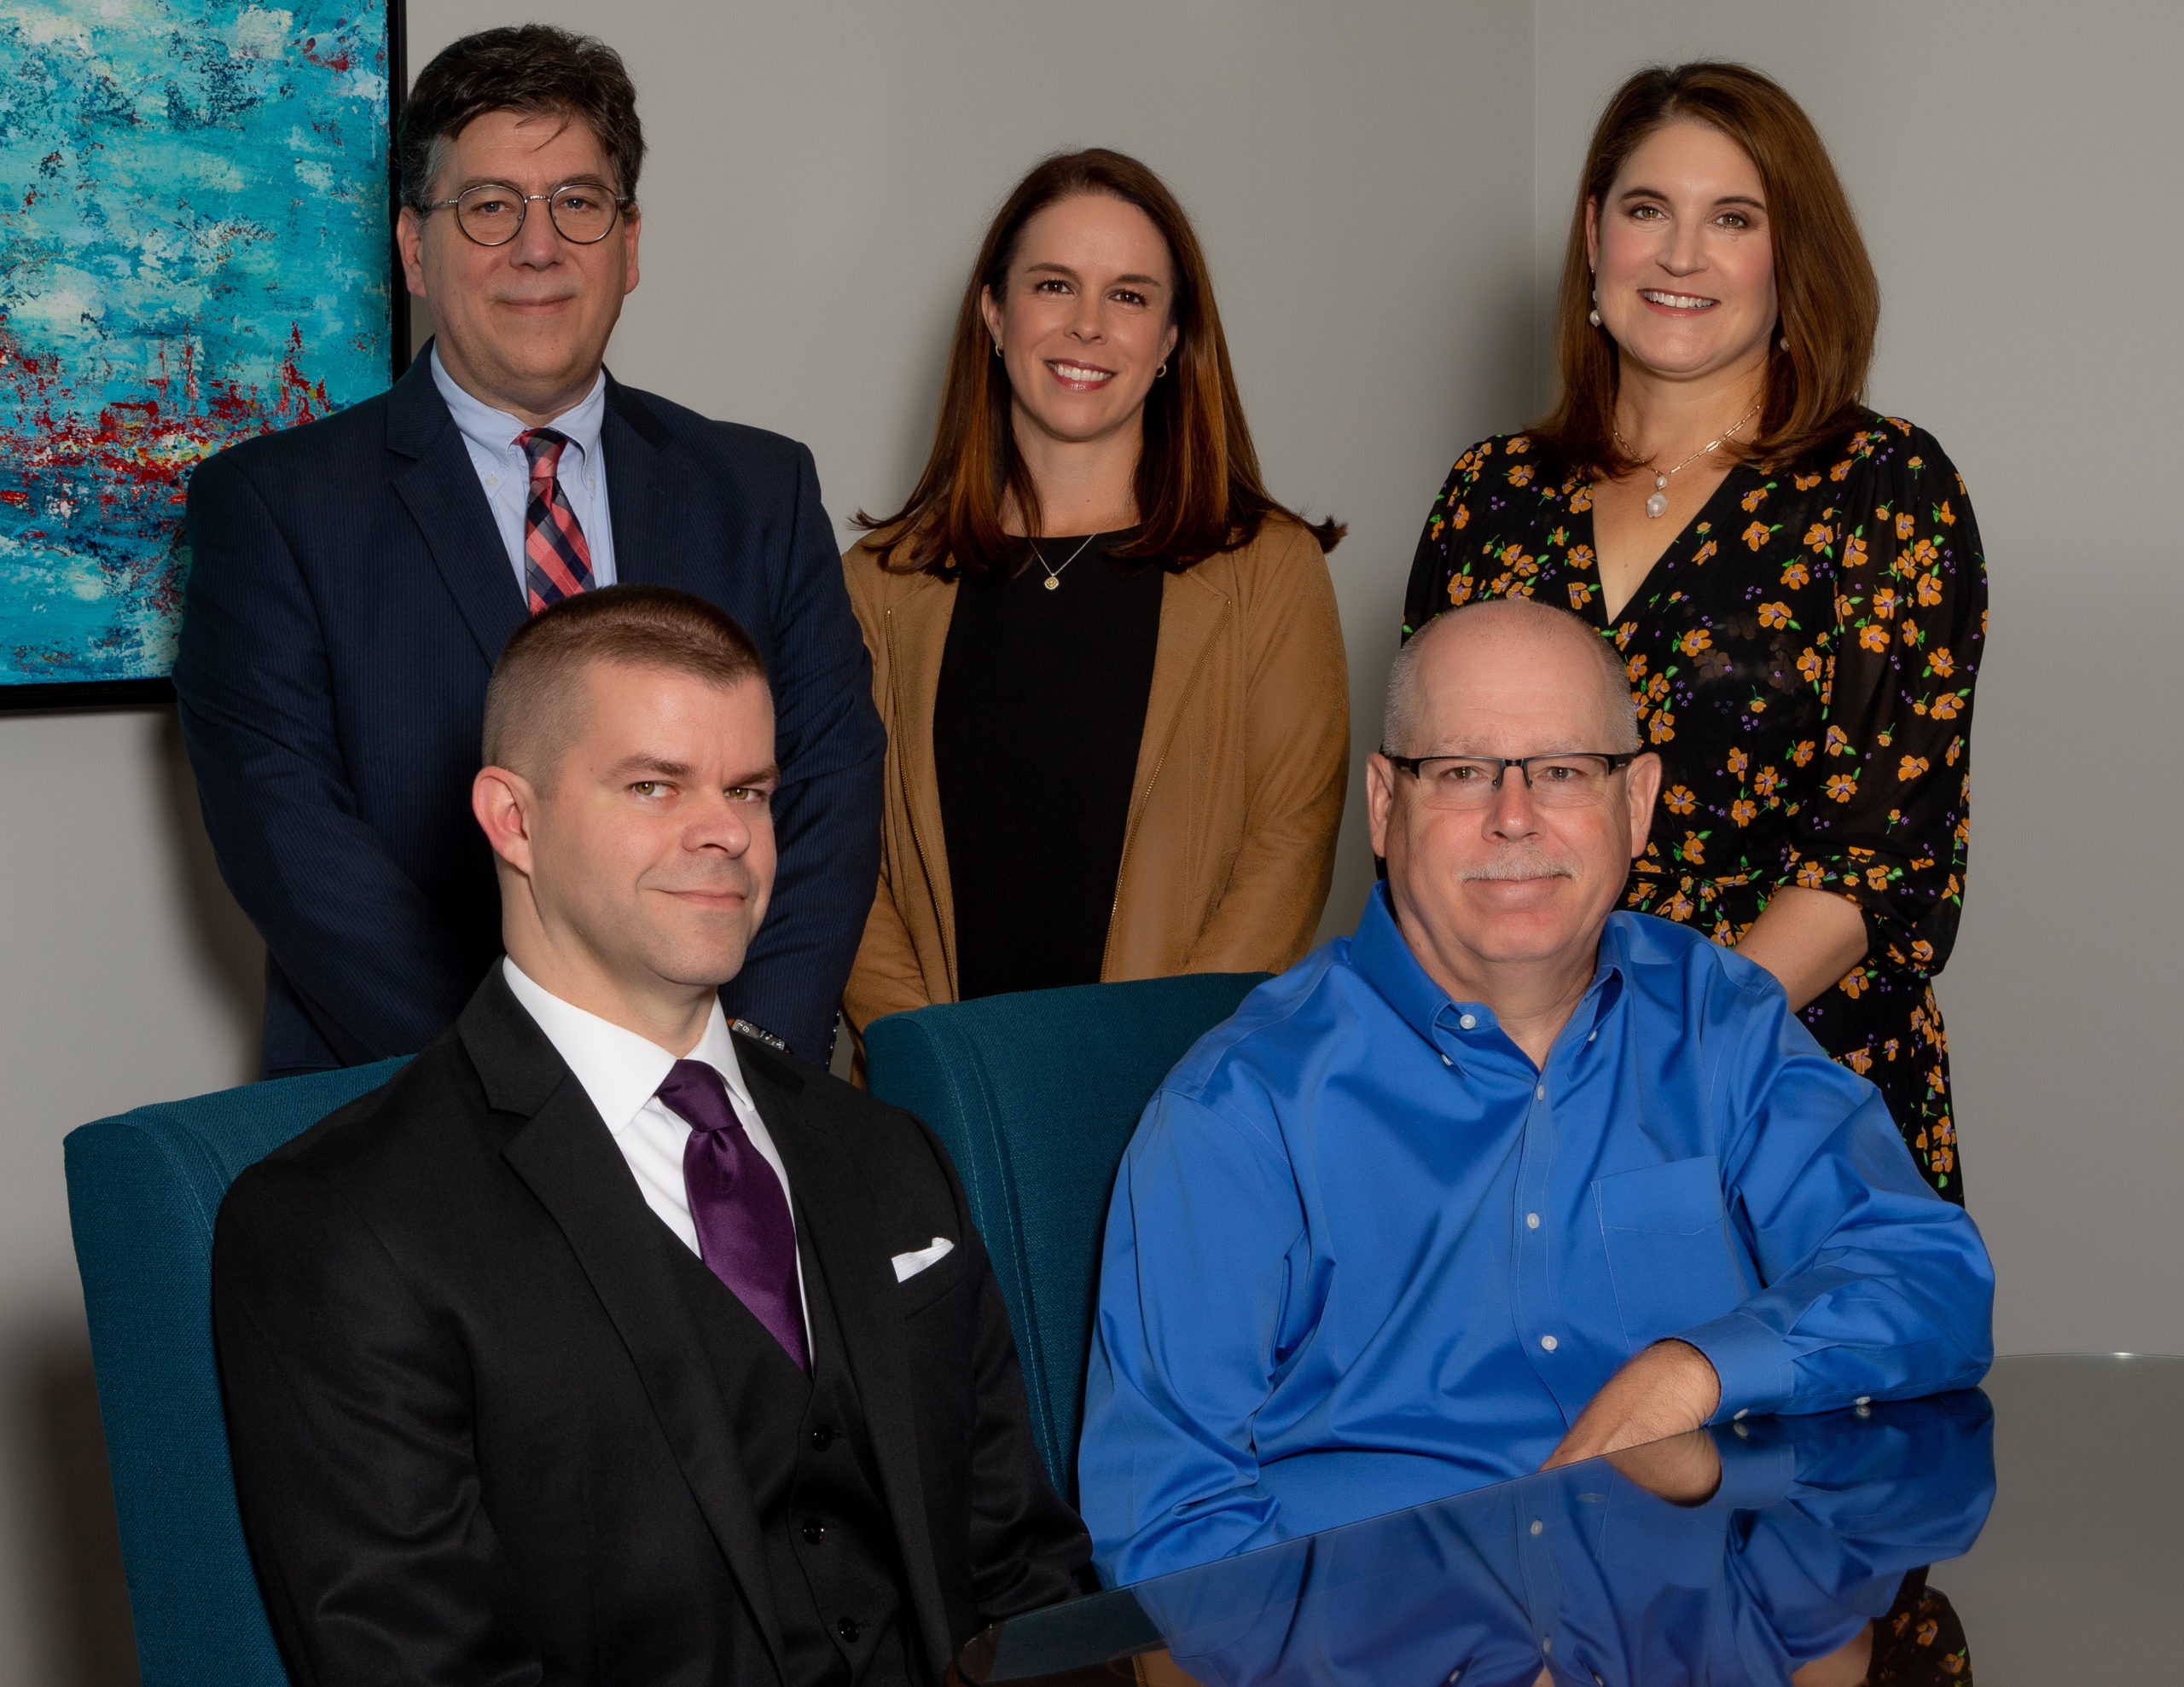 Group Photo of professionals at Byman & Associates PLLC